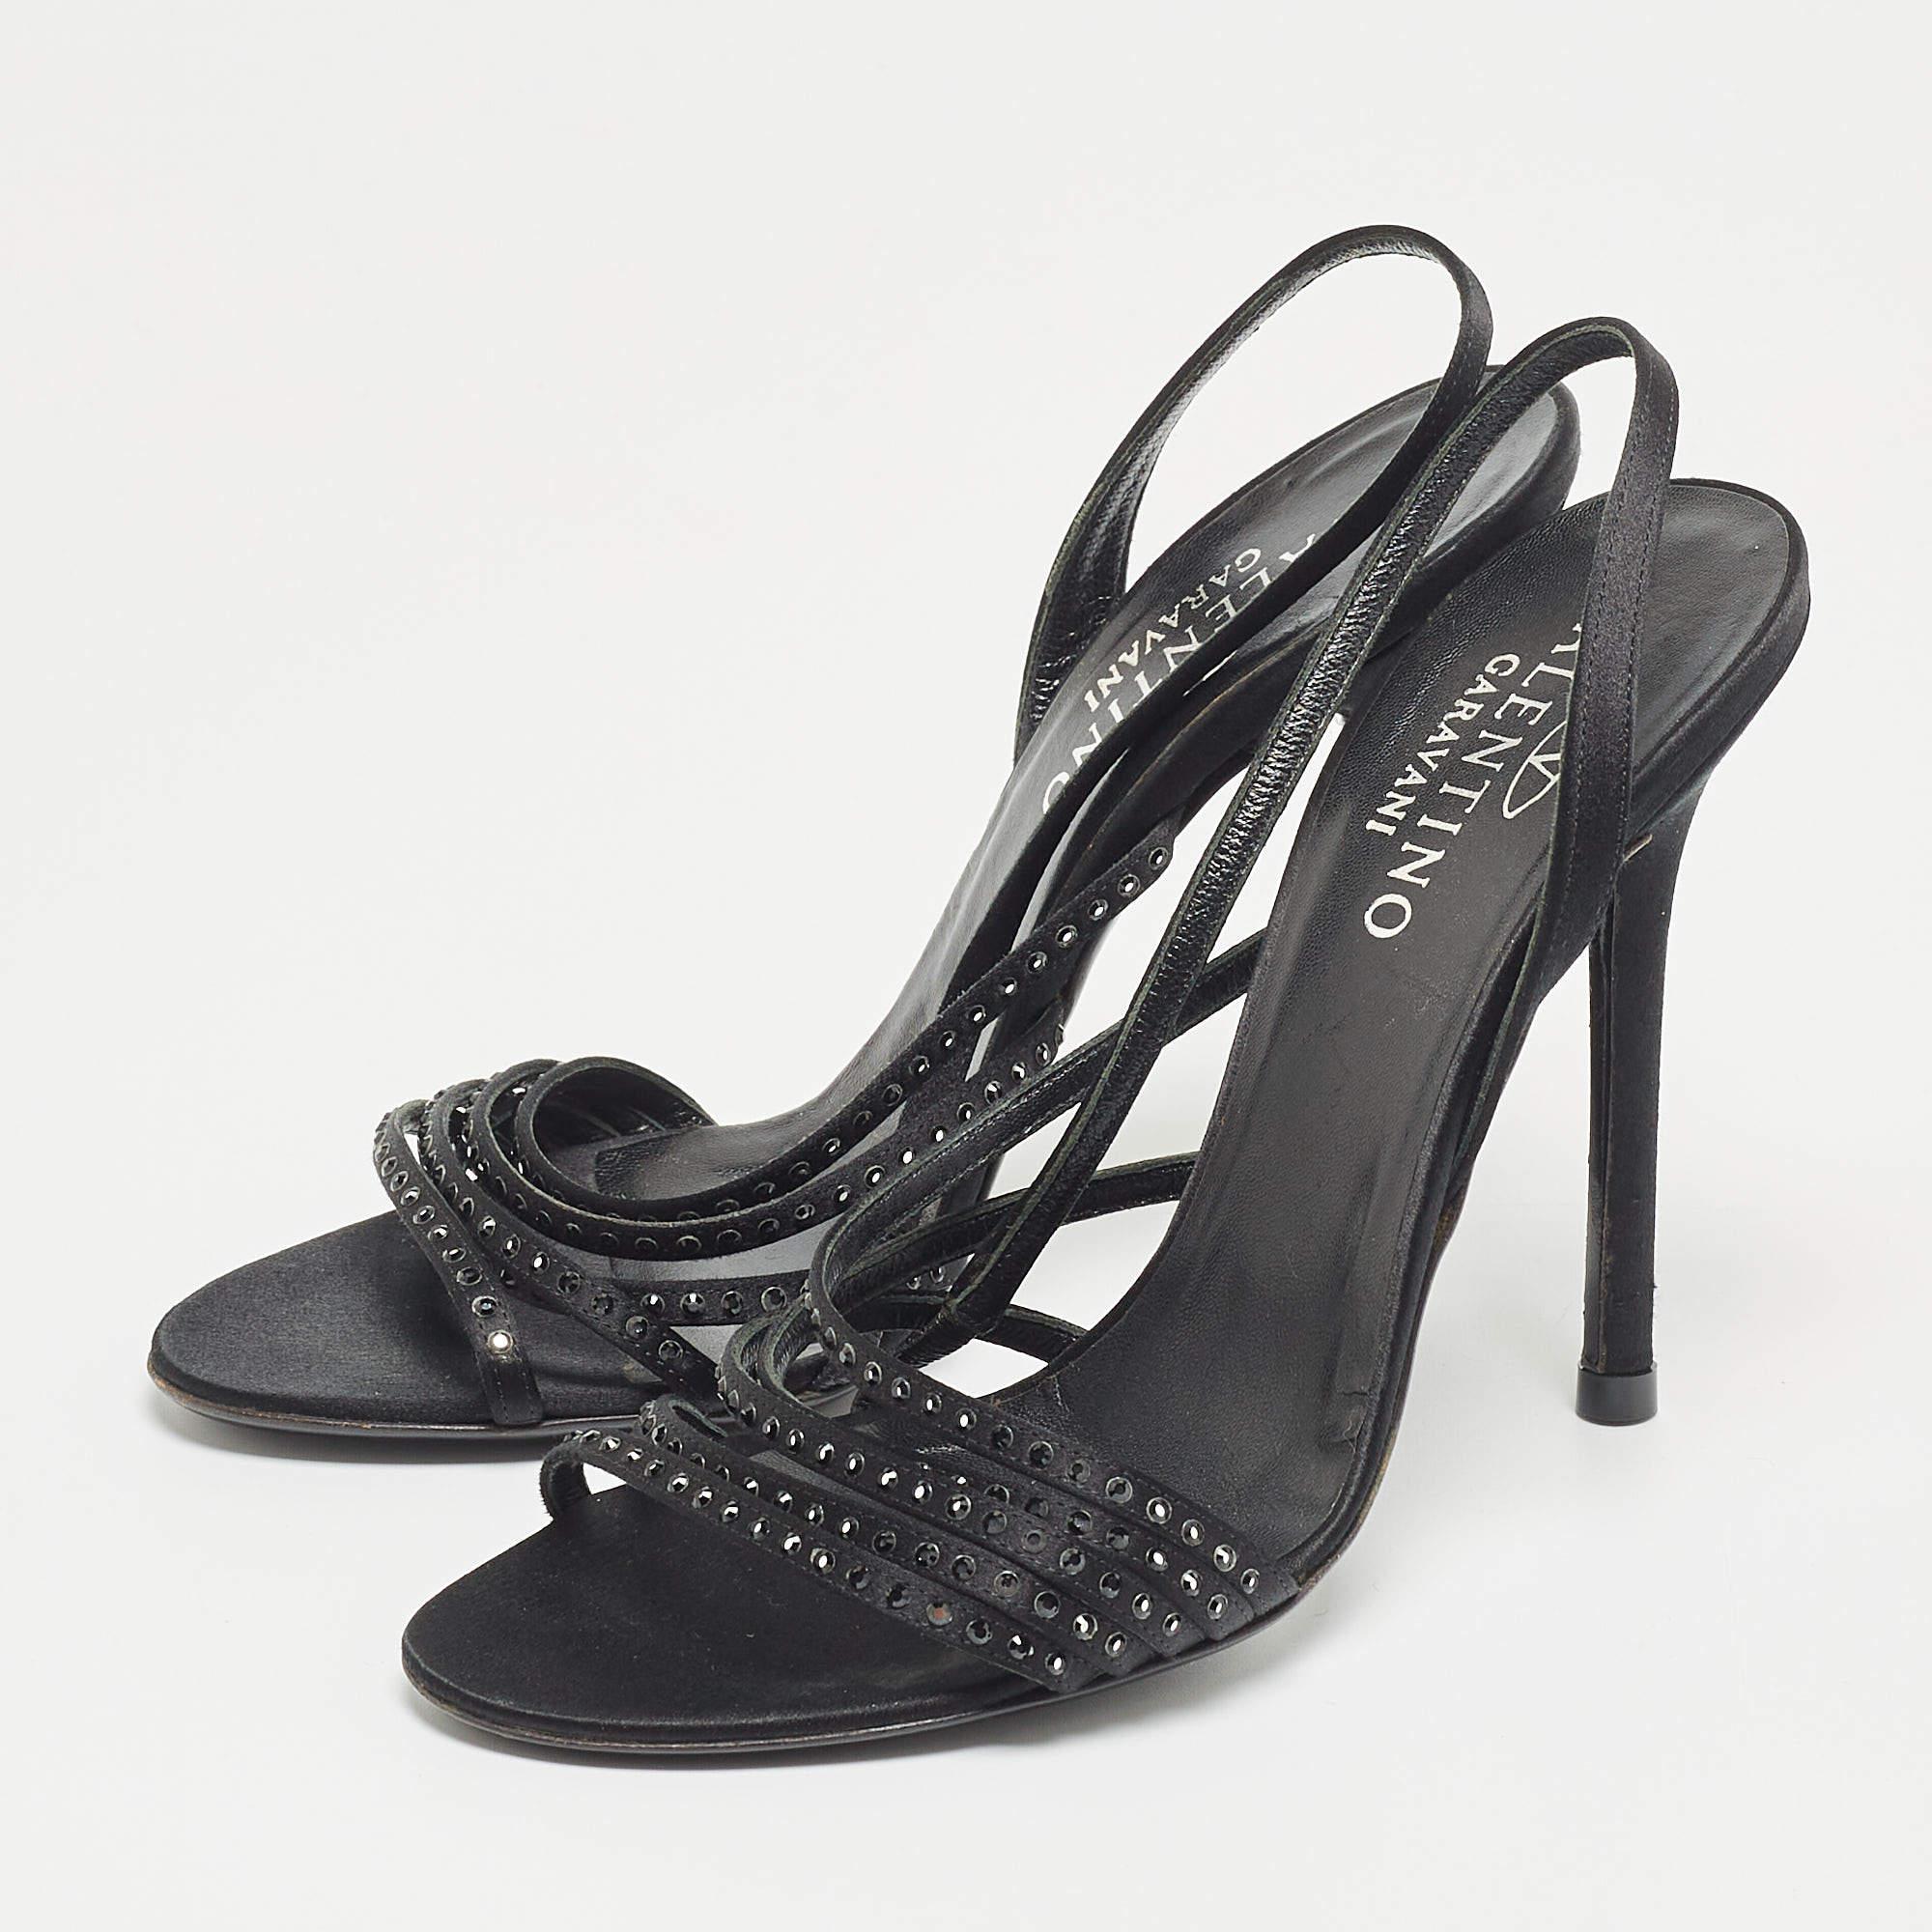 Wonderfully crafted shoes added with notable elements to fit well and pair perfectly with all your plans. Make these Valentino black sandals yours today!

